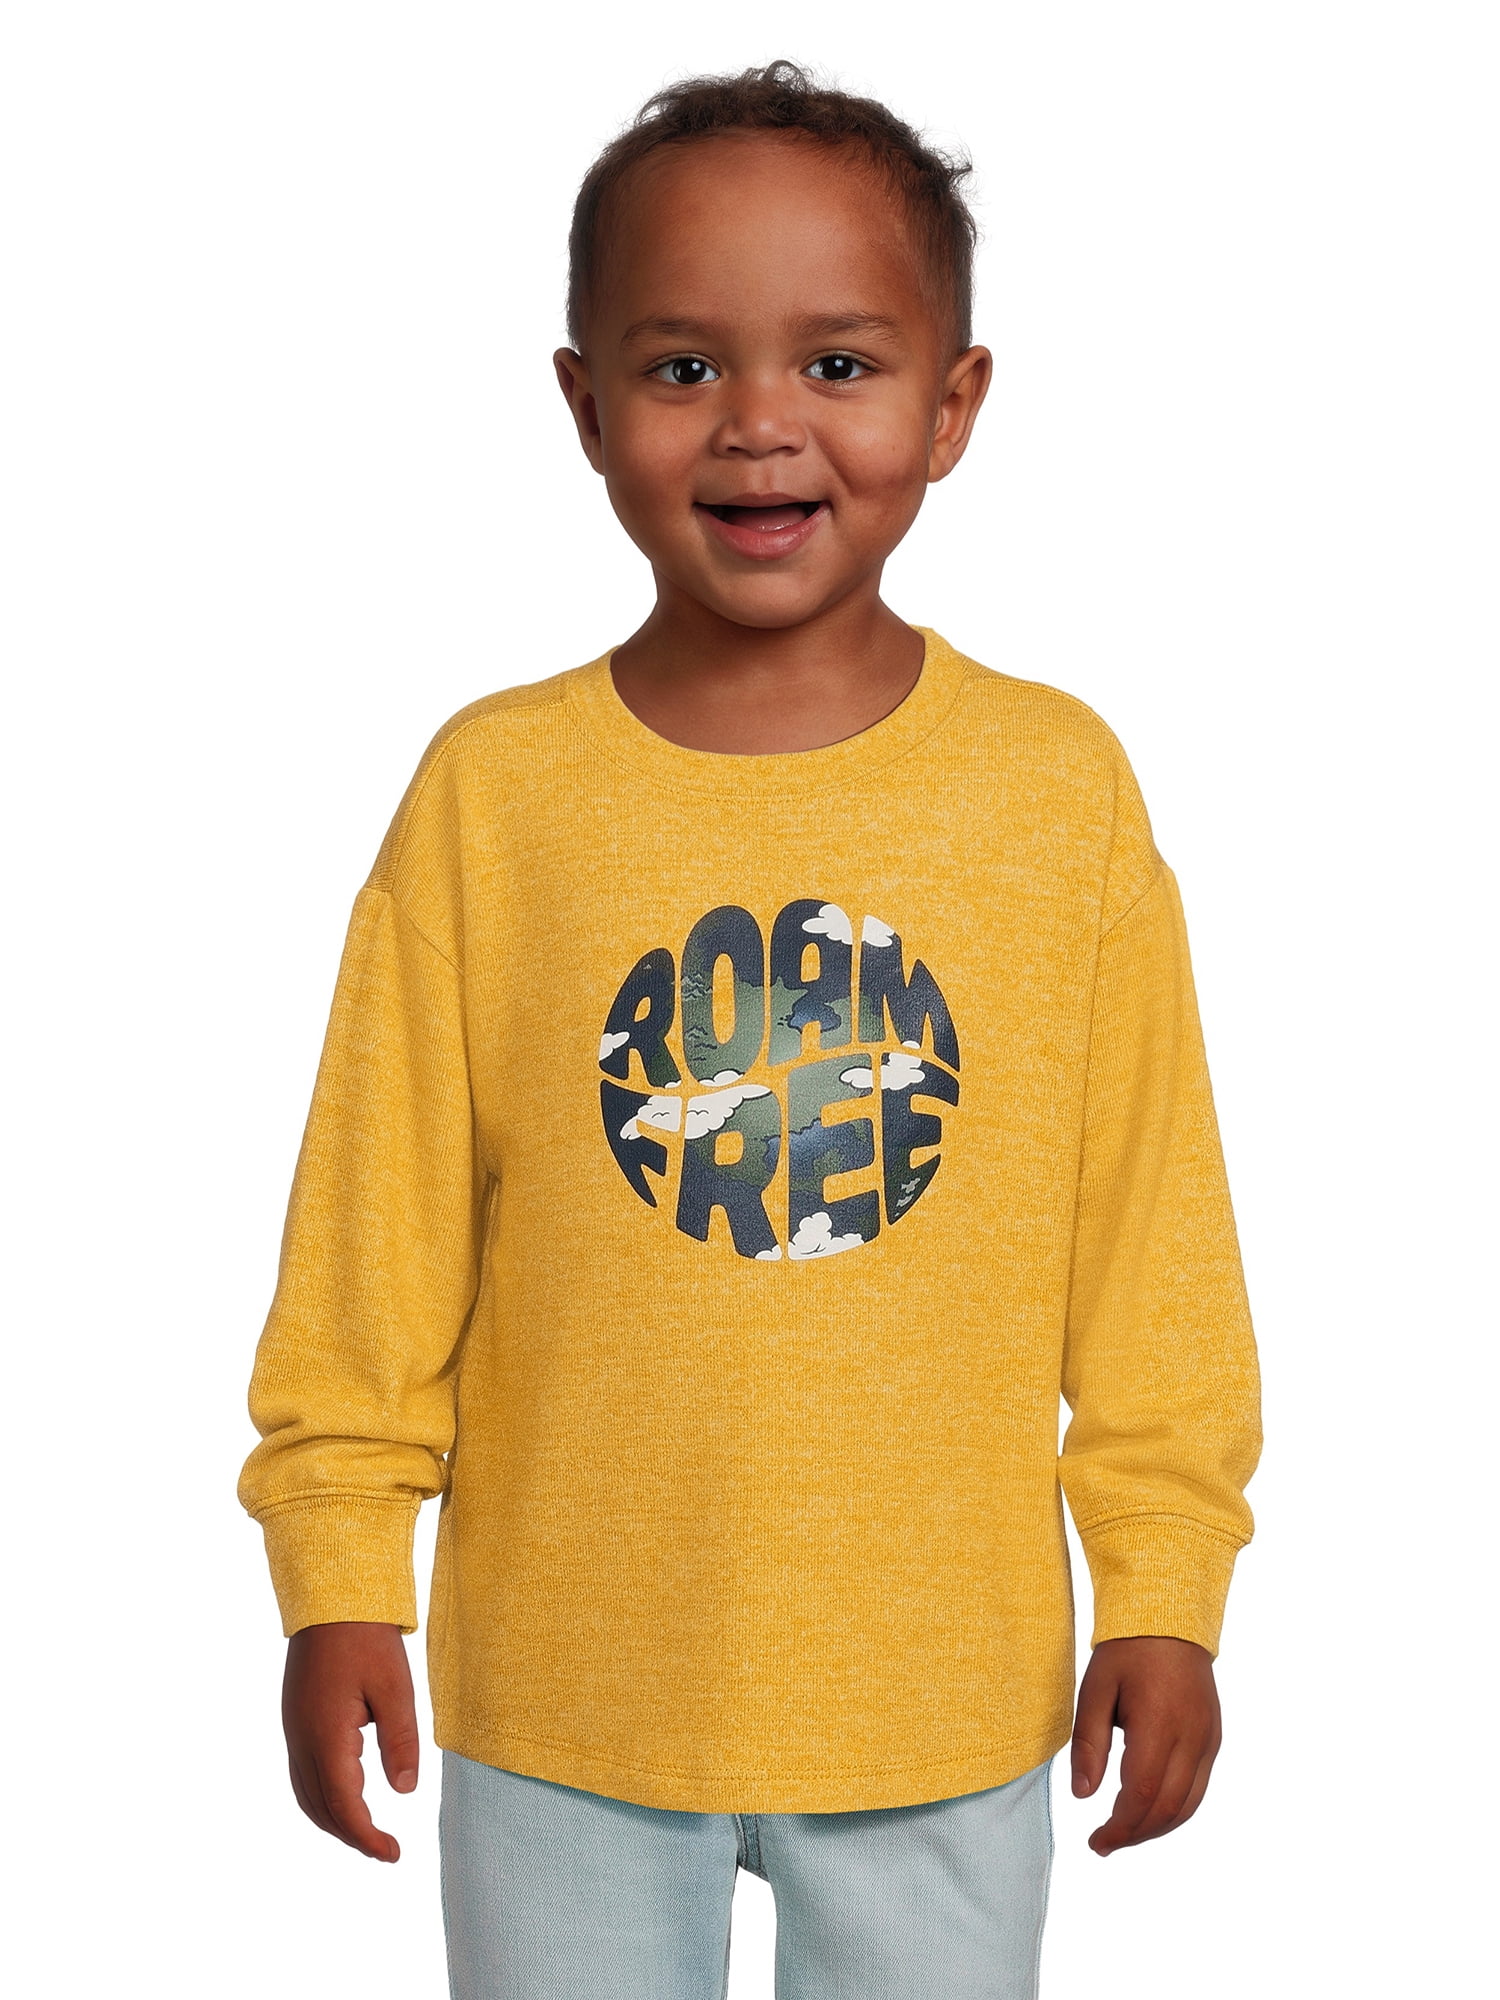 Garanimals Baby and Toddler Boys Long Sleeve Triblend Graphic Tee ...